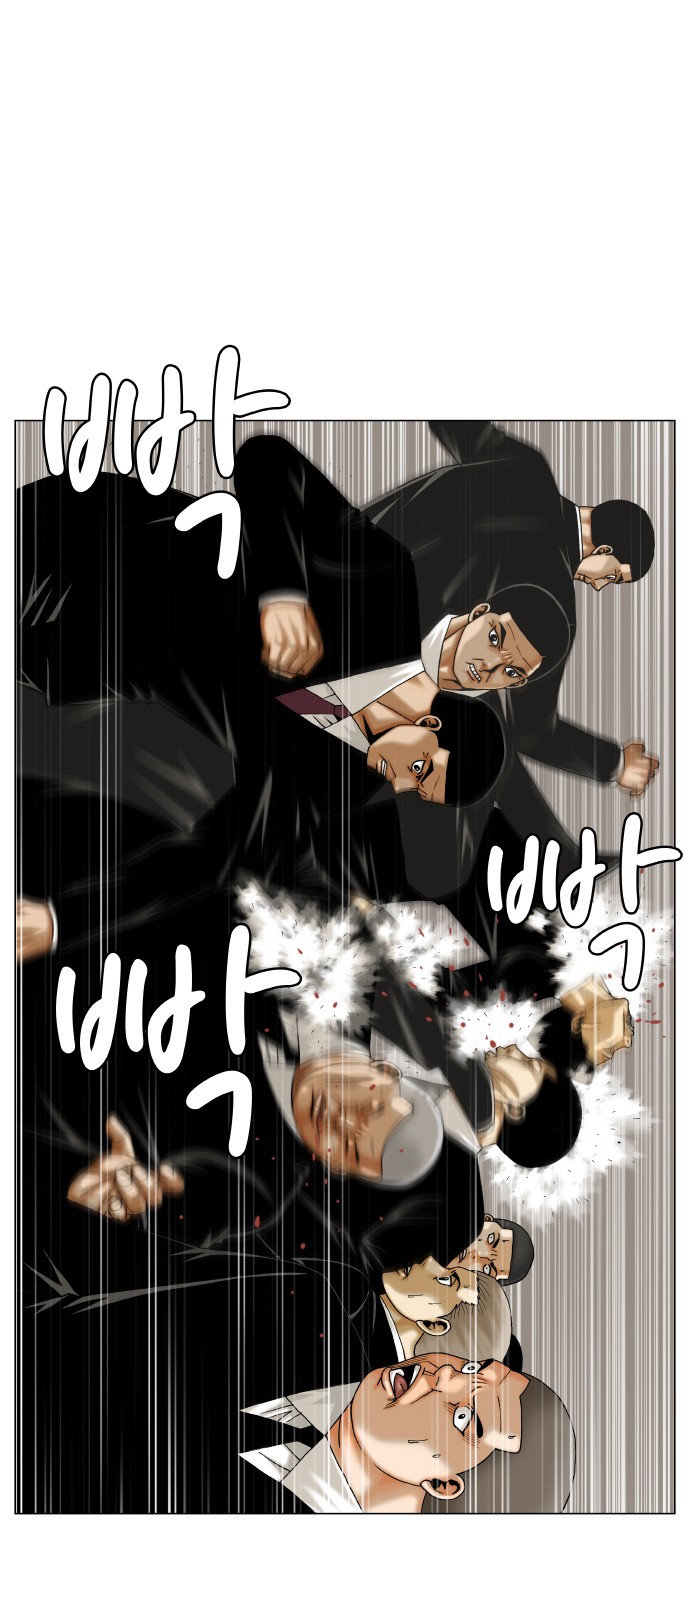 Ultimate Legend - Kang Hae Hyo - Chapter 266 - Page 3